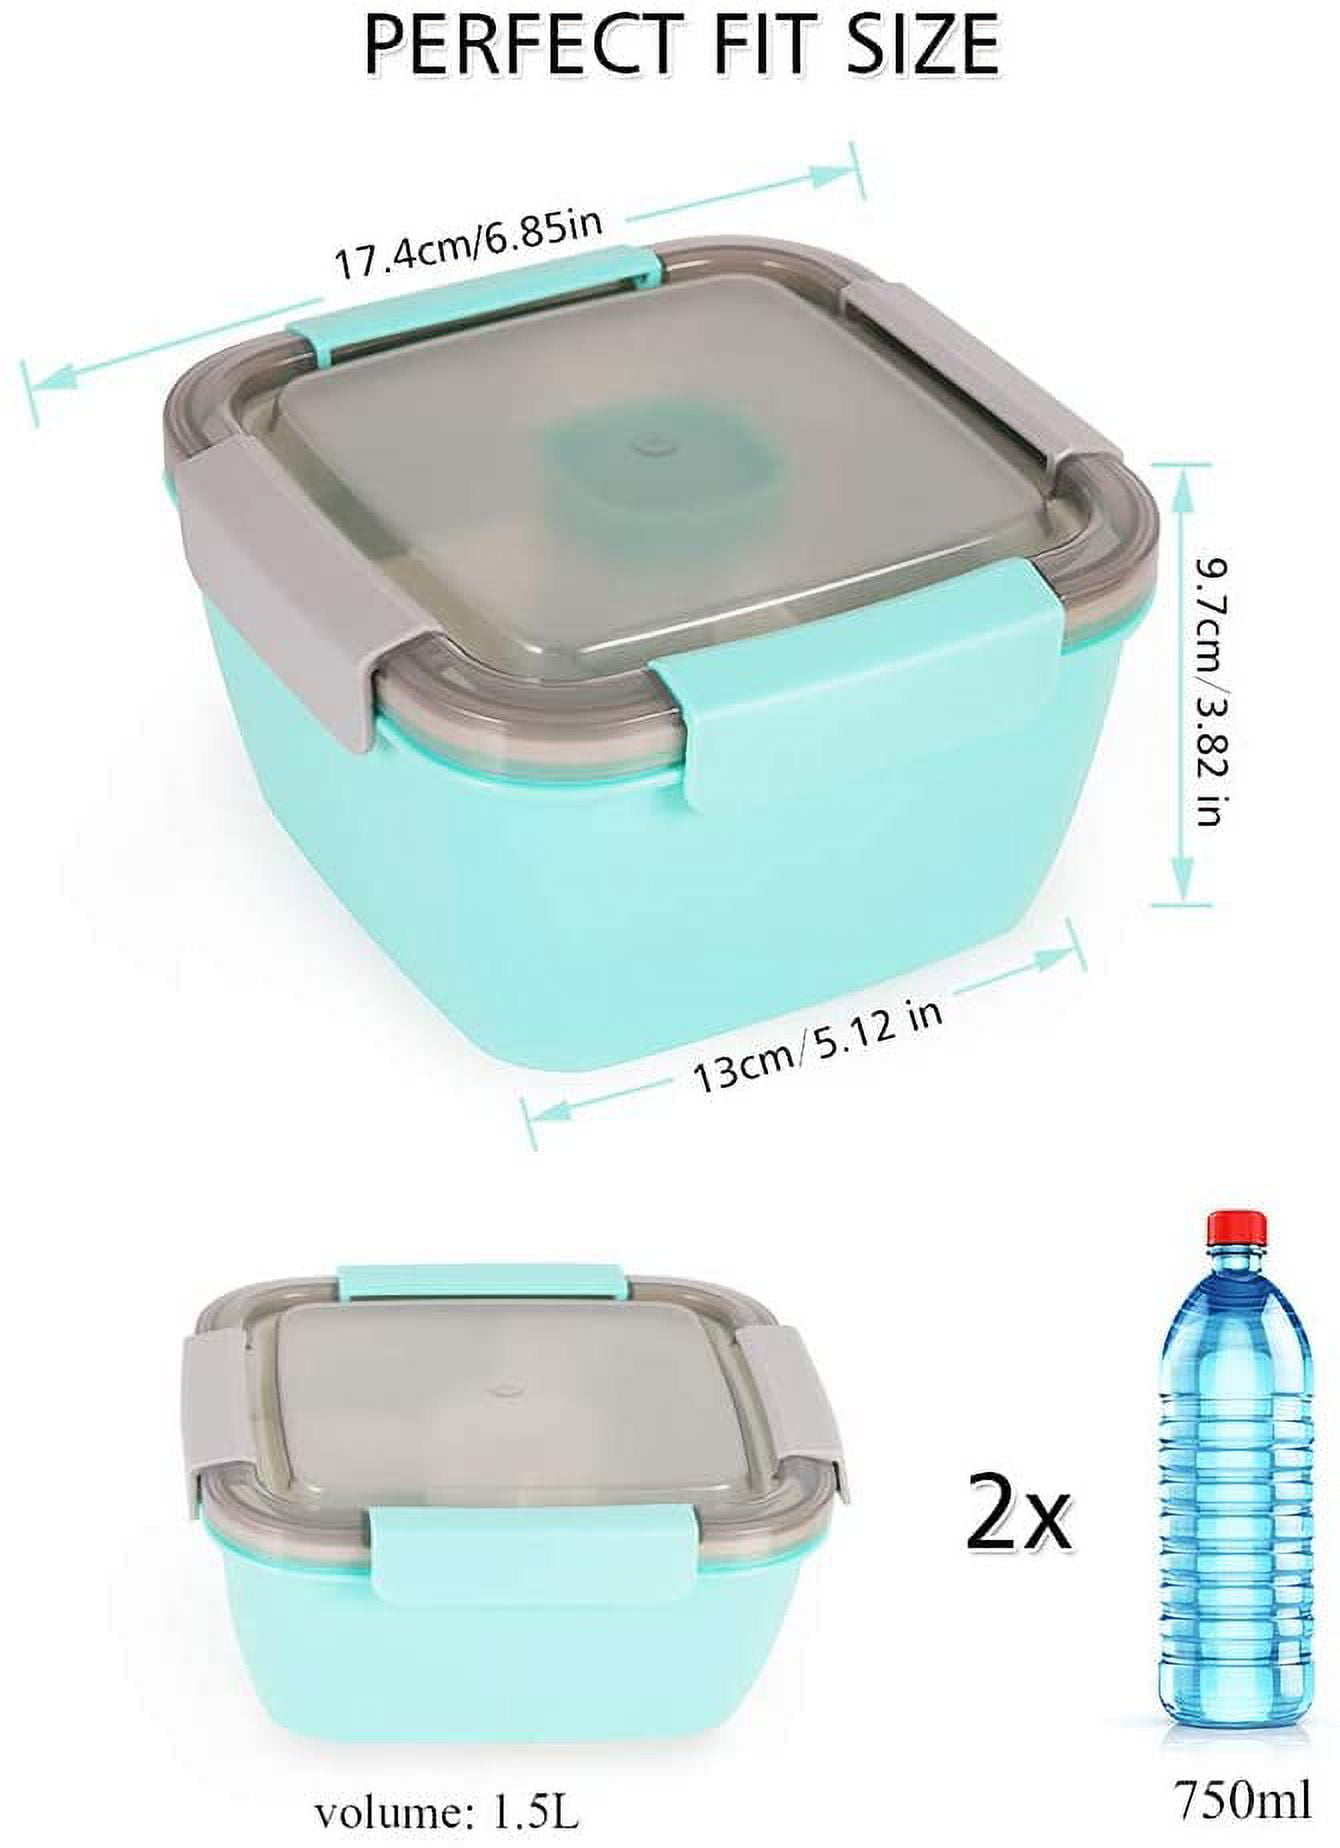 Freshmage Salad Lunch Container To Go Review and Demonstration.52